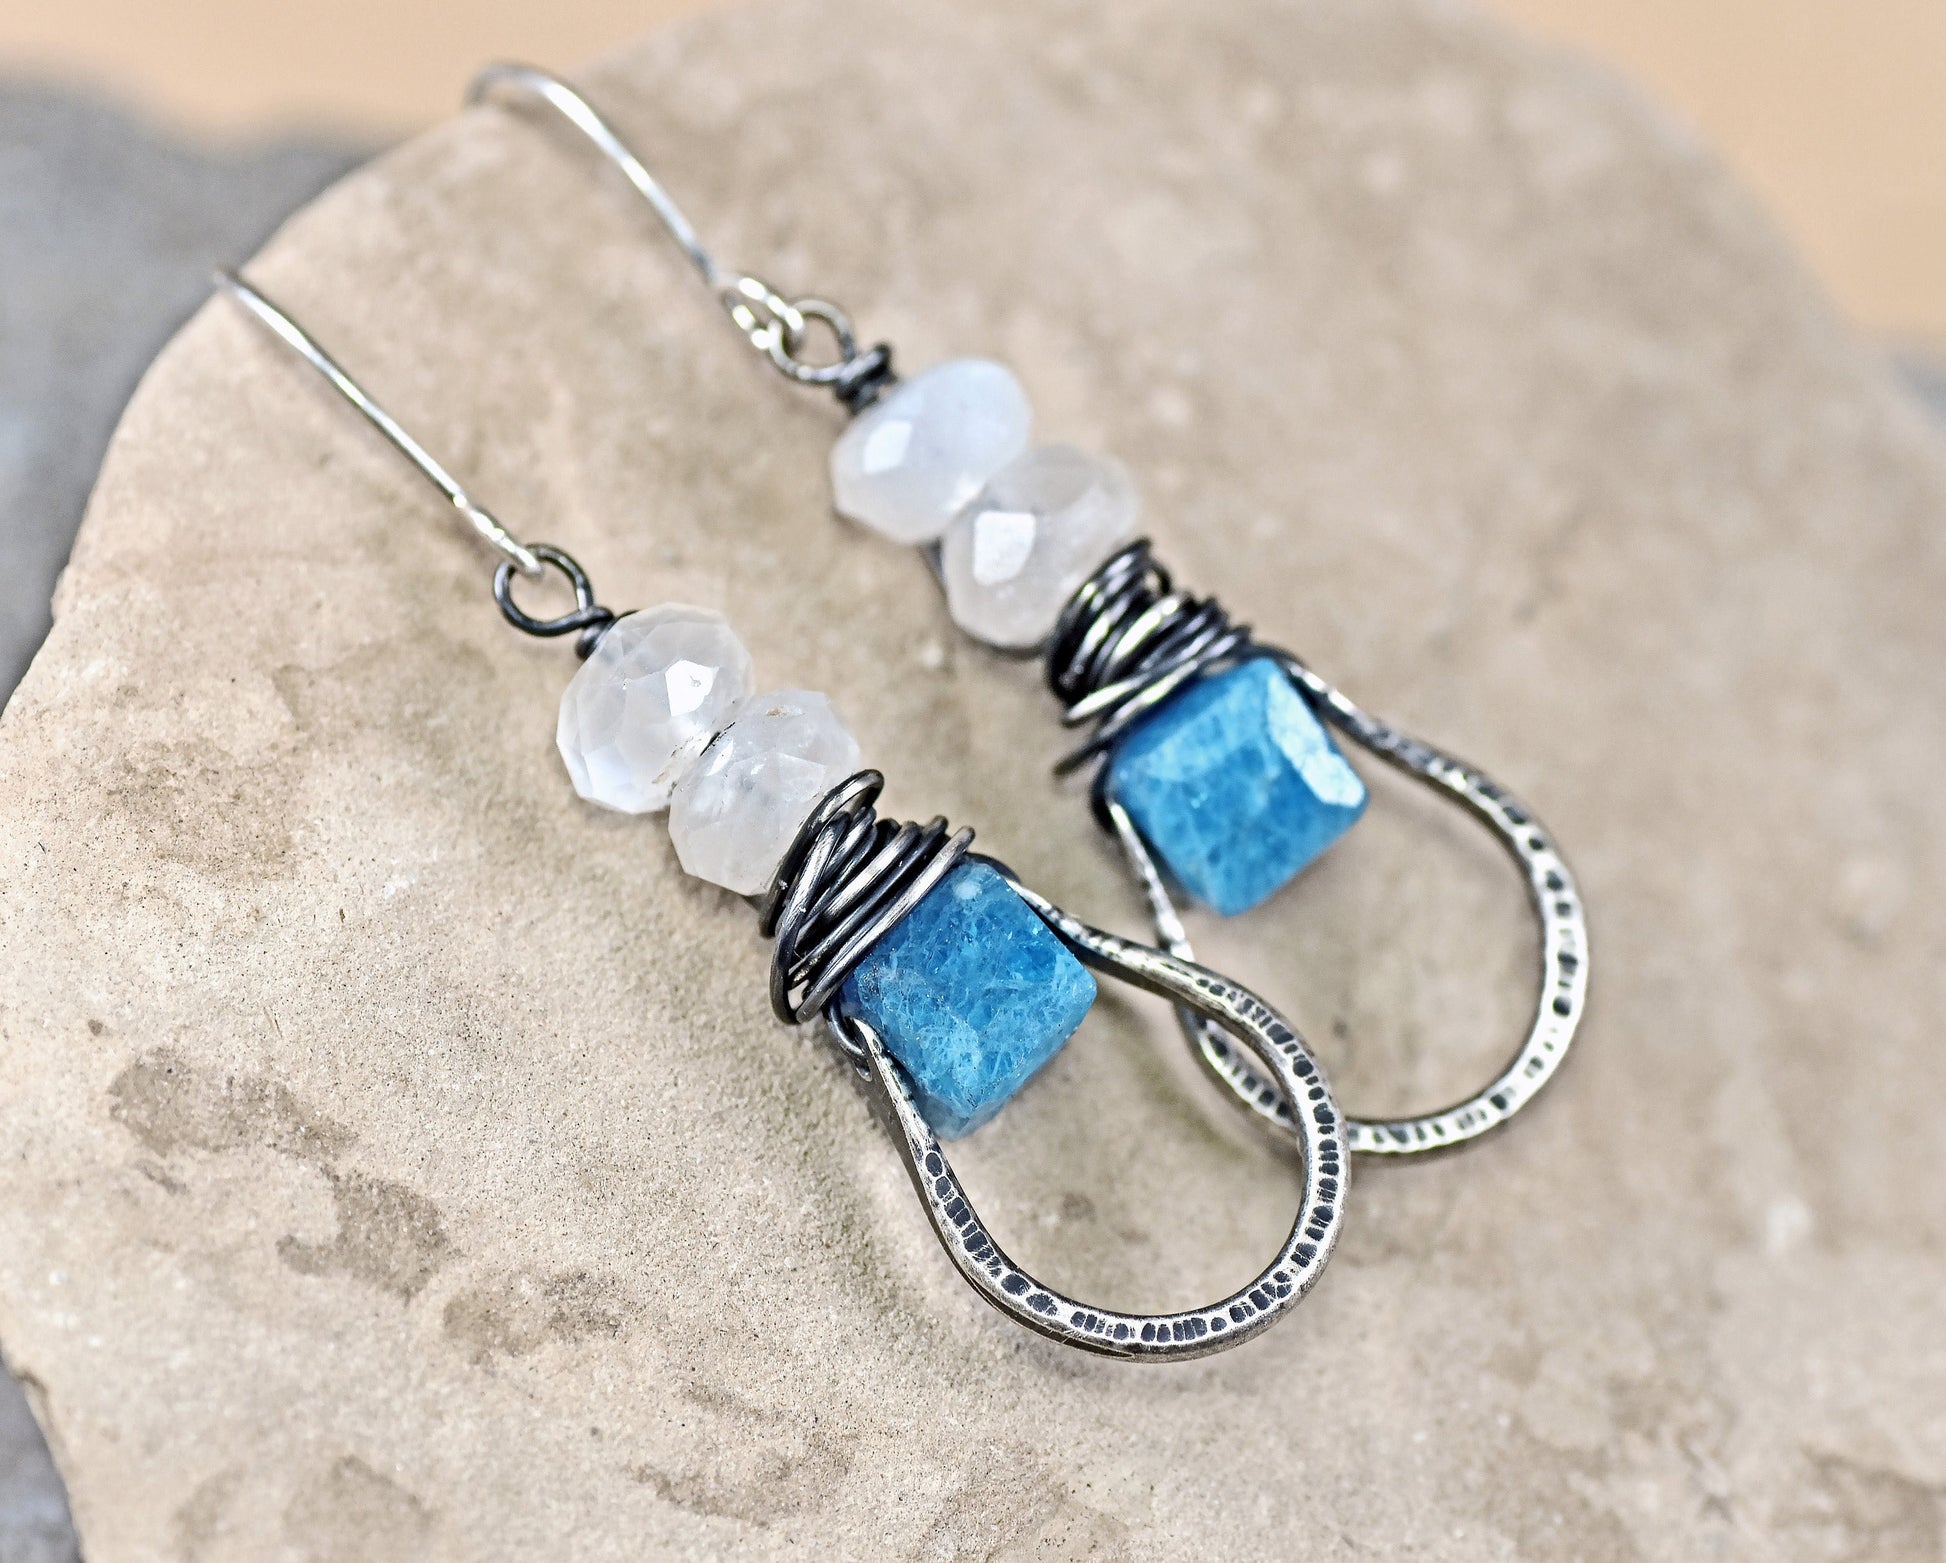 Blue Apatite Earrings, Rustic Moonstone Sterling Silver Dangles, Natural Stone Wire Wrap Jewelry, Artisan Unique Metalwork